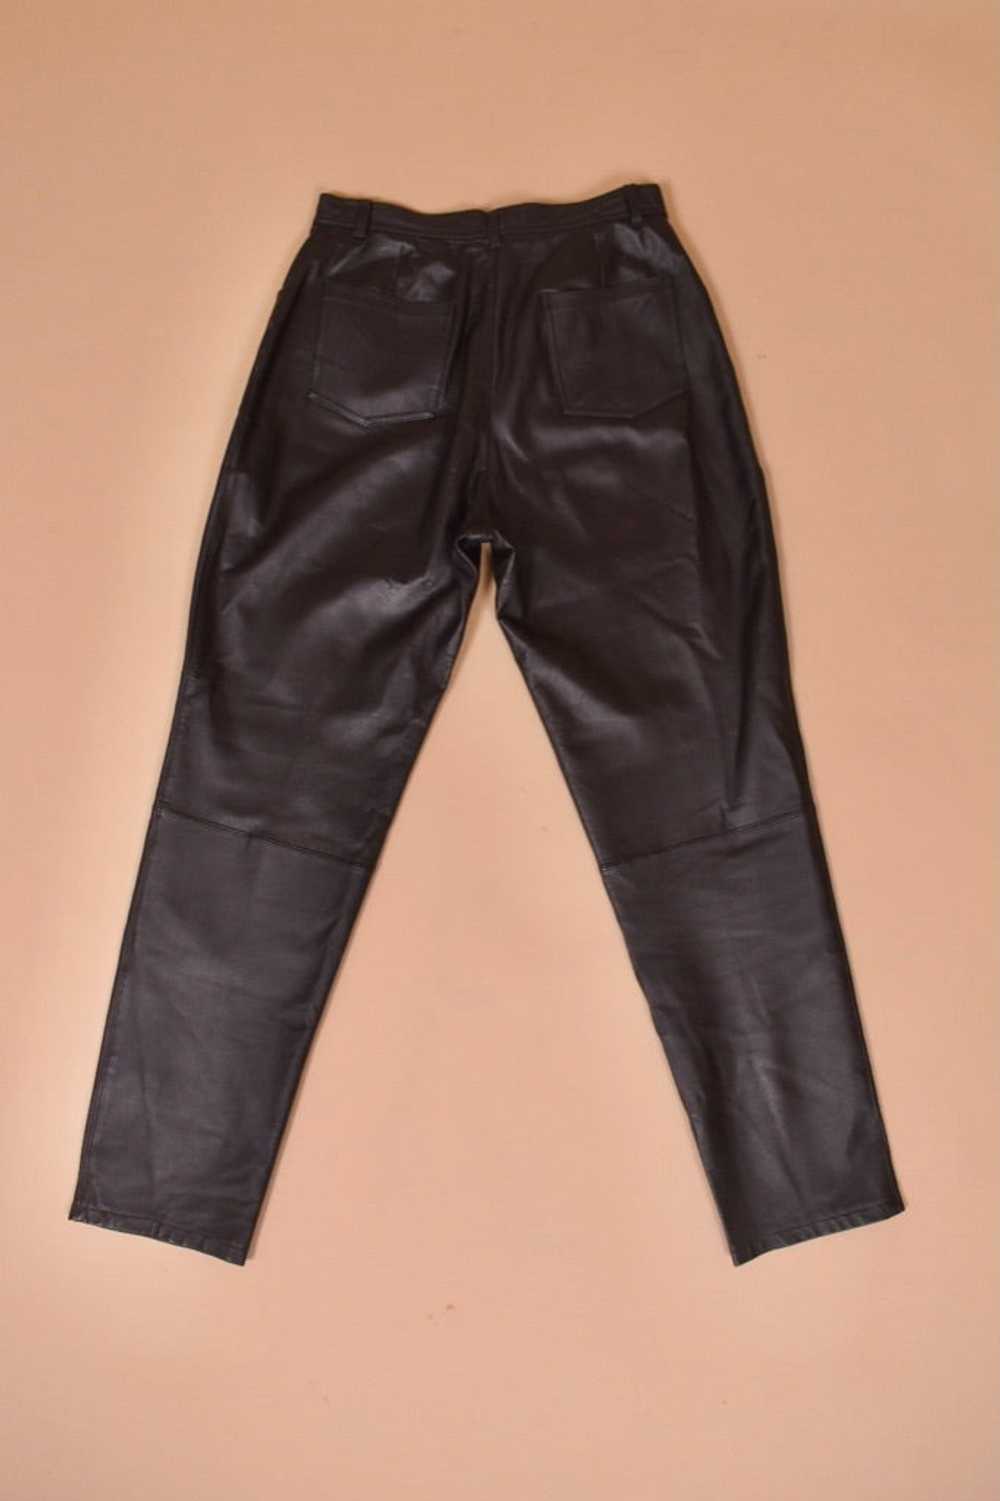 Black High Rise Leather Pants By Marie Claire, L - image 4